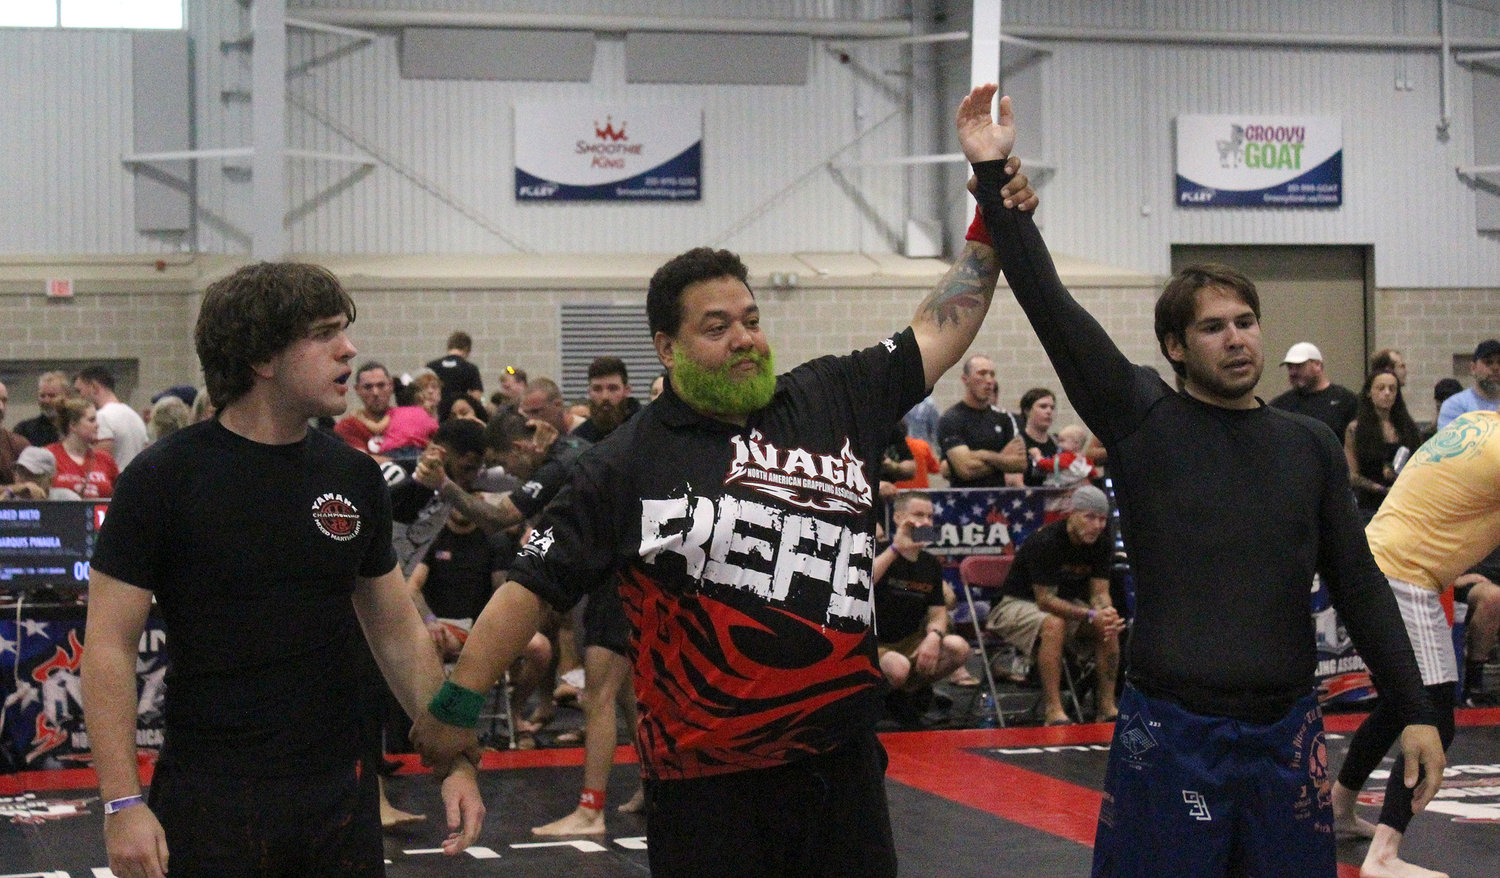 Anthony Elio beat Will Robbins by submission to win gold in the novice cruiser weight division at the U.S. National meet hosted by the North American Grappling Association at the Foley Sports Tourism Complex last Saturday.